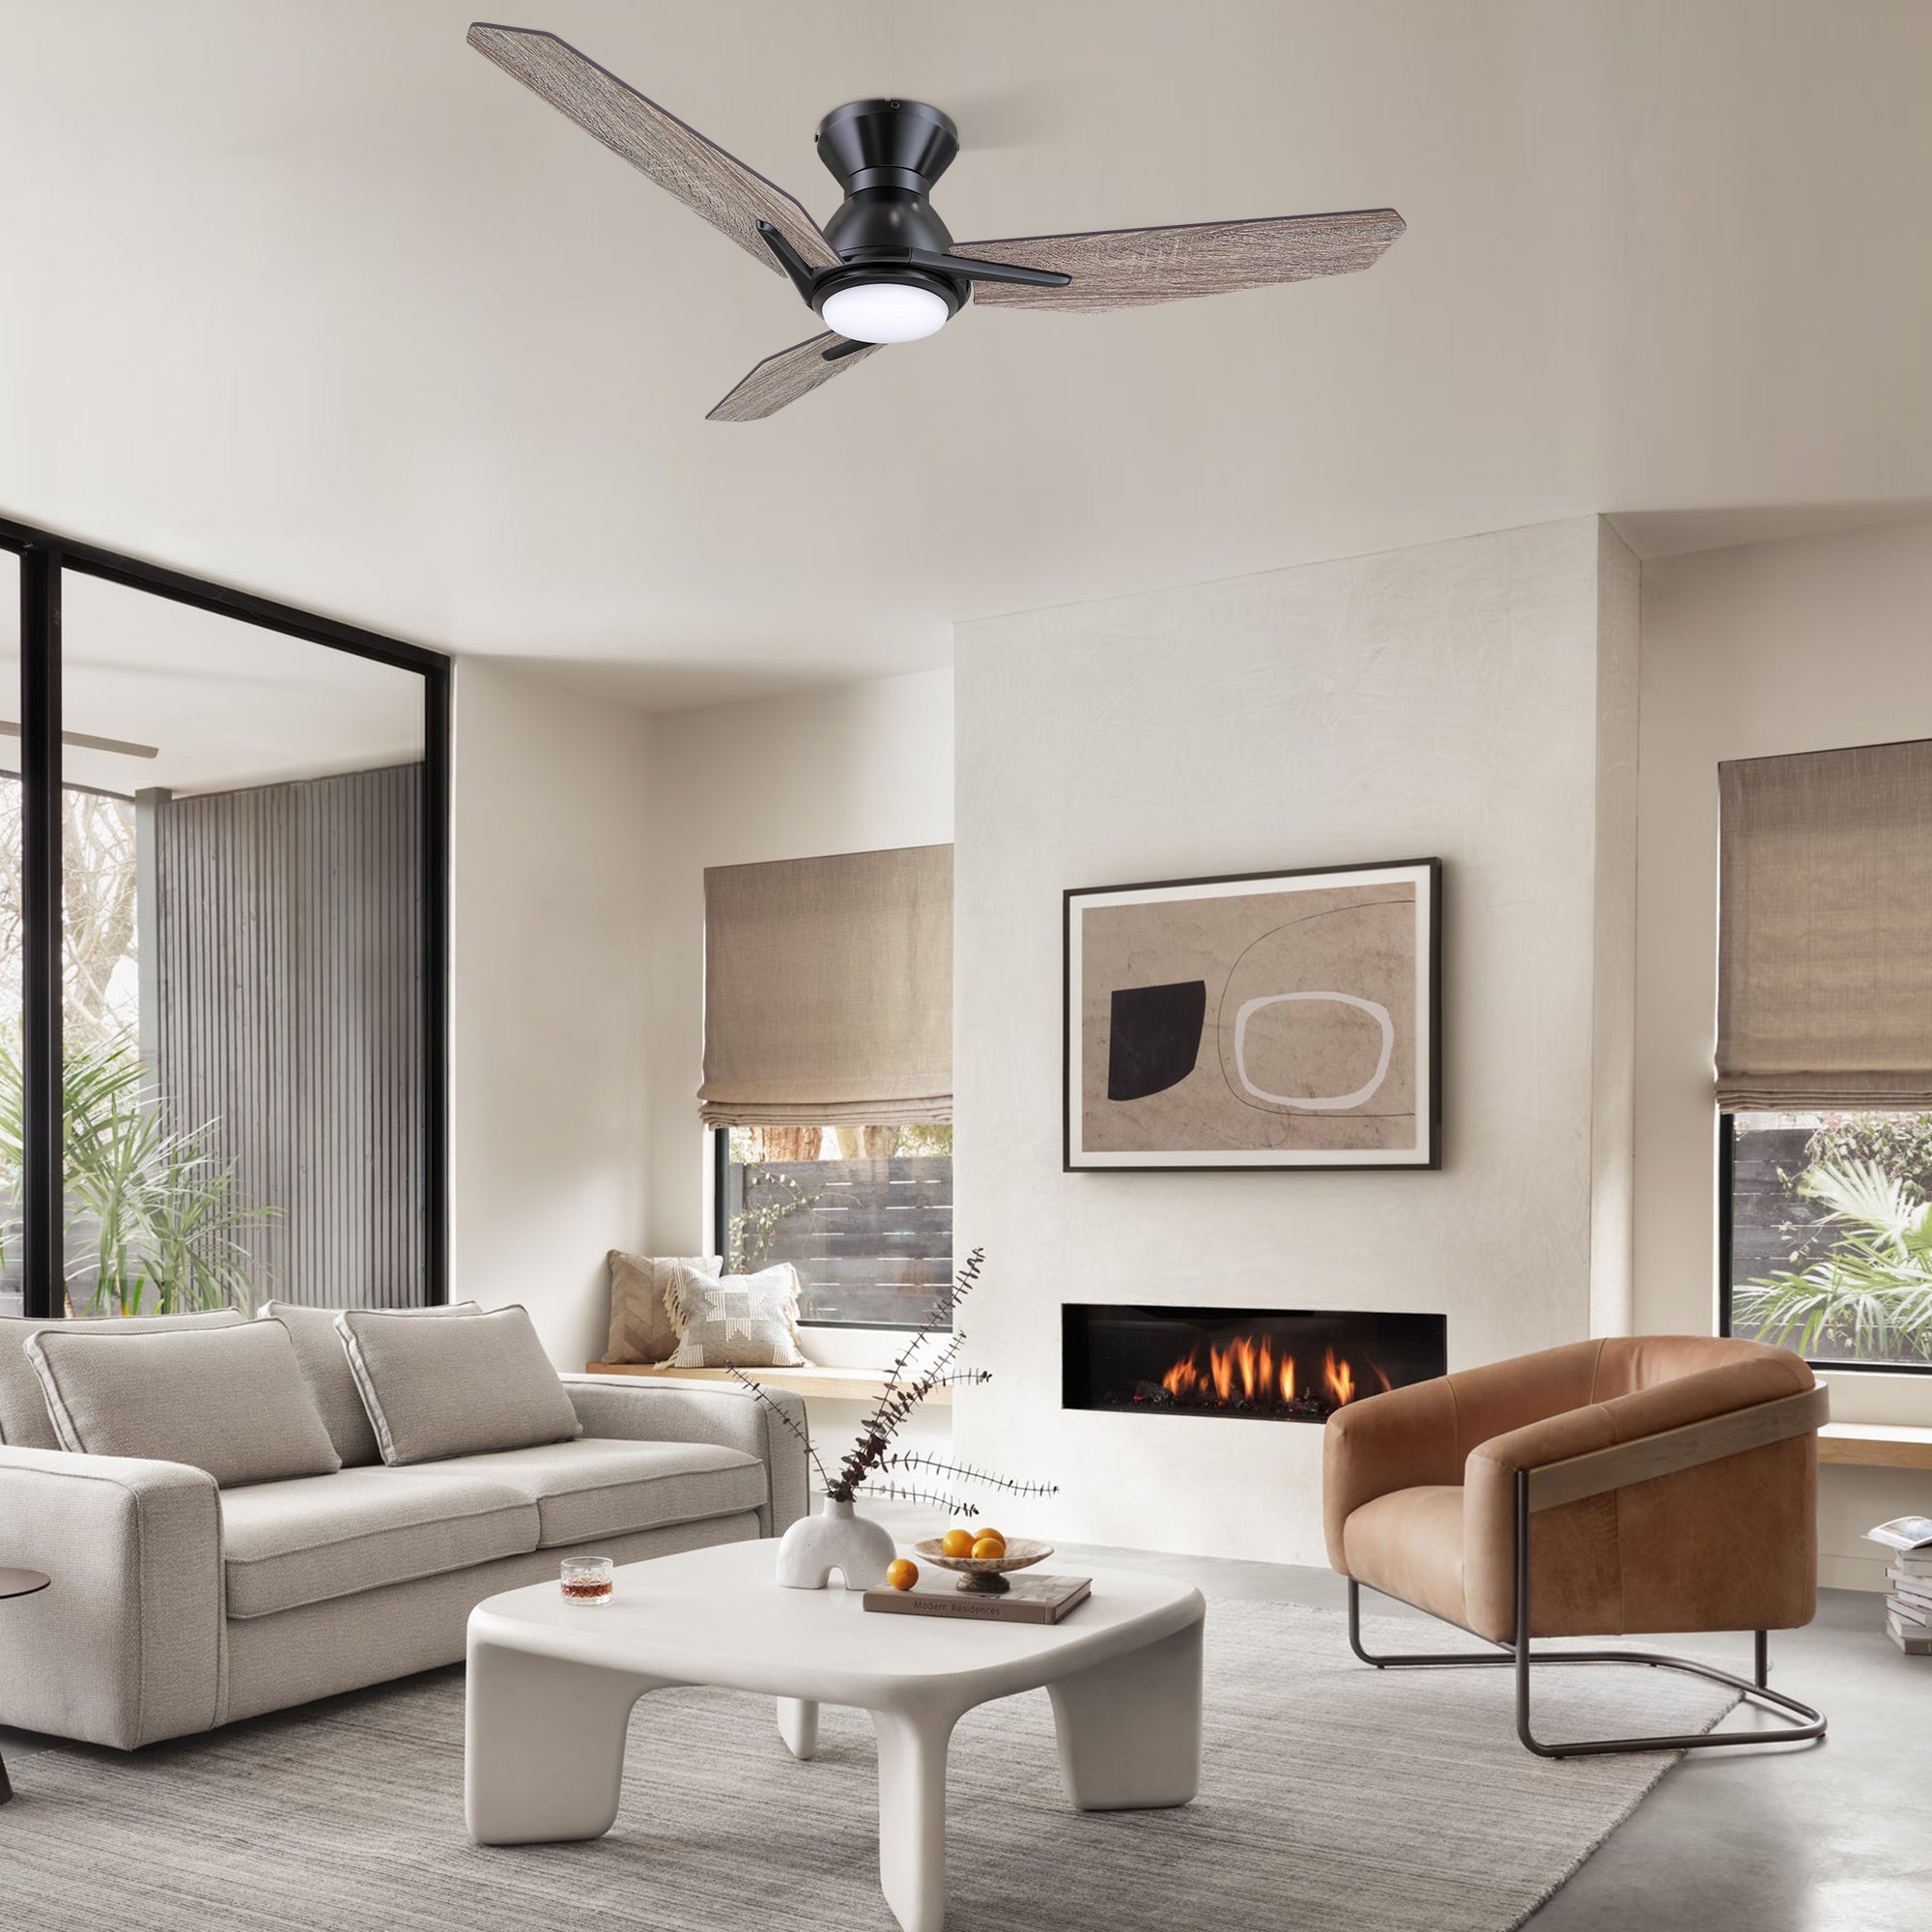 This Smafan Brooks 44 inch smart ceiling fan keeps your space cool, bright, and stylish. It is a soft modern masterpiece perfect for your large indoor living spaces. This Wifi smart ceiling fan is a simplicity designing with Black finish, use elegant Plywood blades and has an integrated 4000K LED daylight. The fan features Remote control, Wi-Fi apps, Siri Shortcut and Voice control technology (compatible with Amazon Alexa and Google Home Assistant ) to set fan preferences. #color_Wood